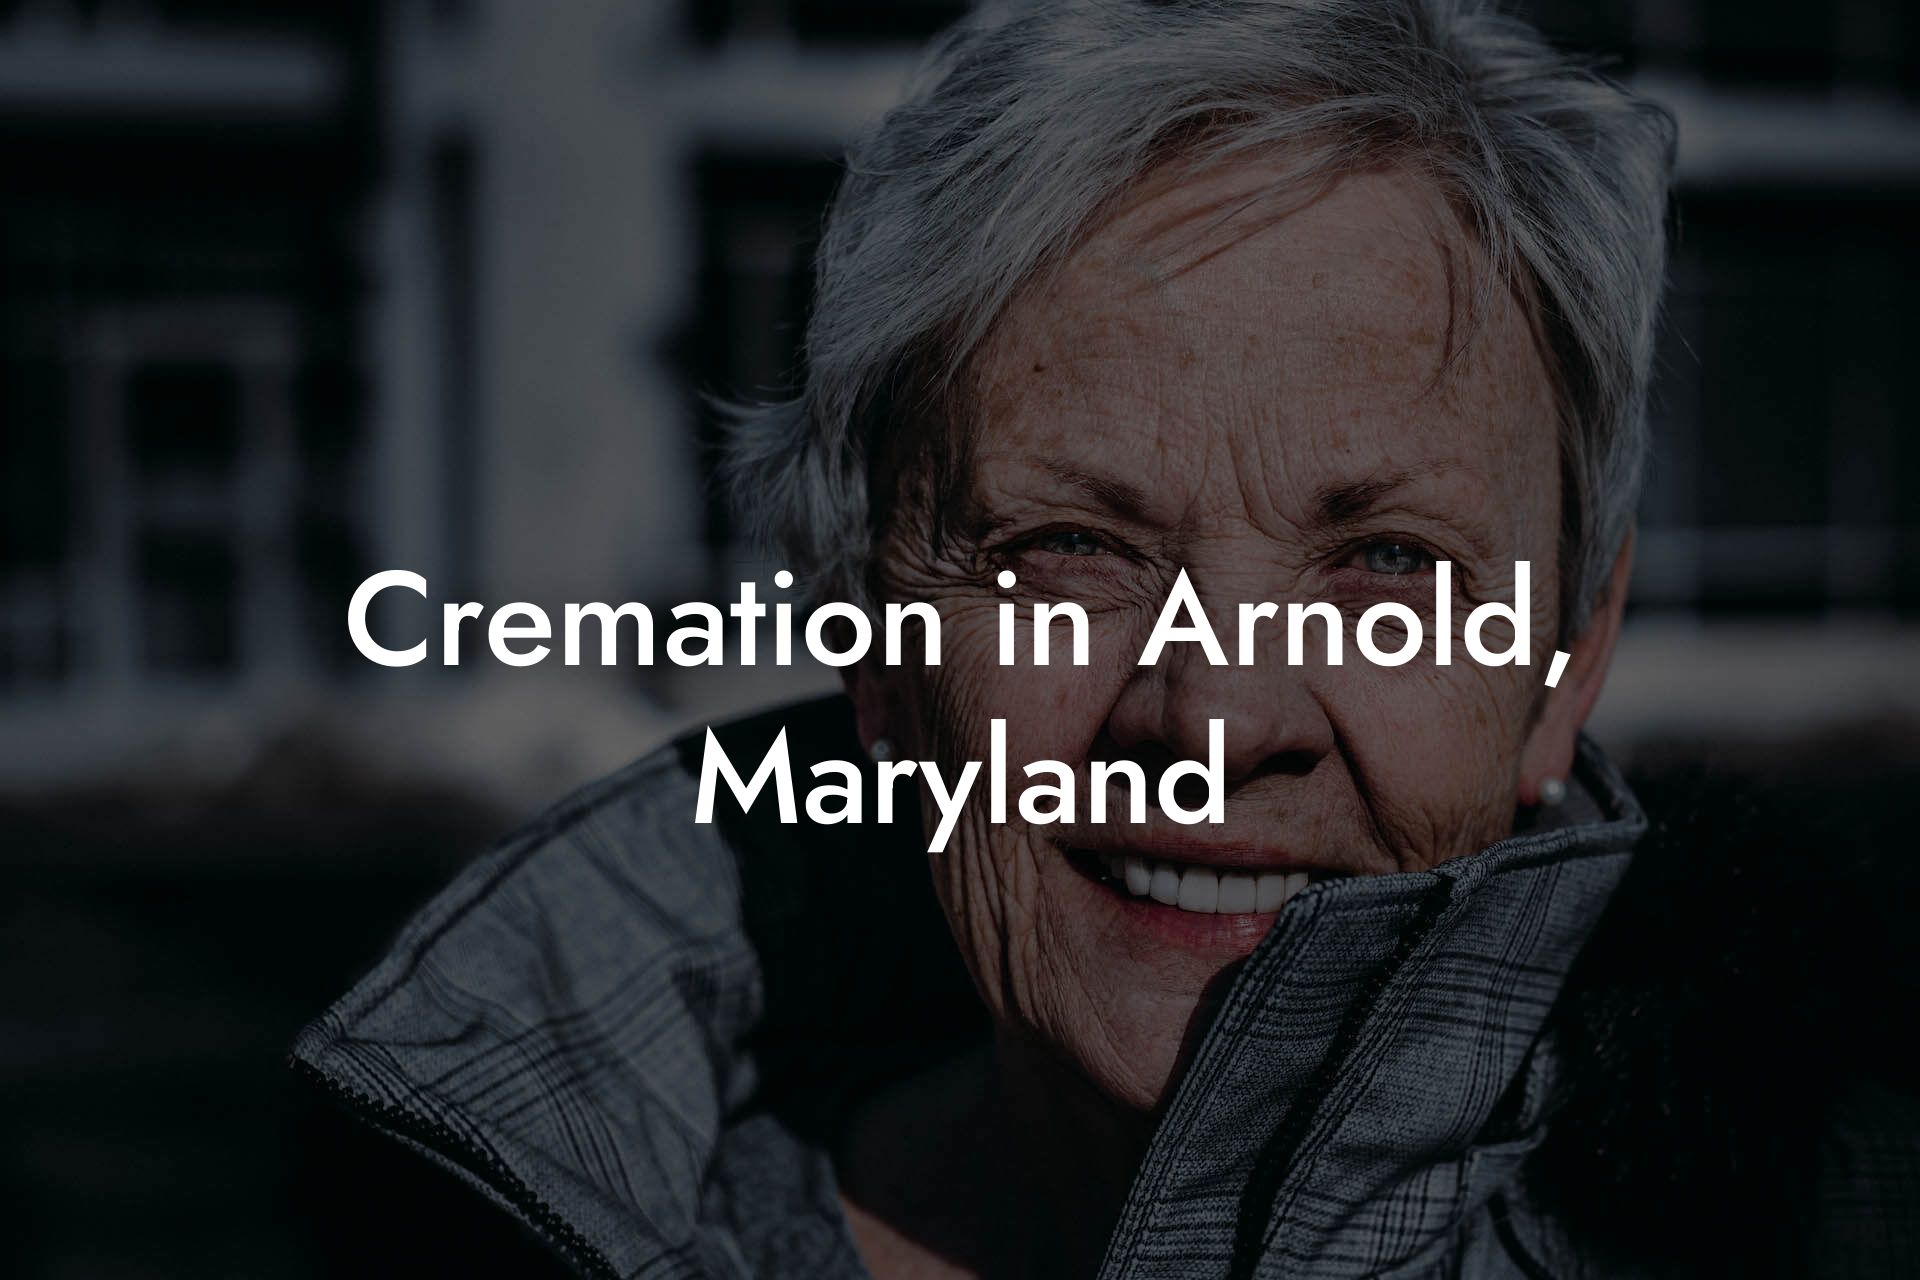 Cremation in Arnold, Maryland